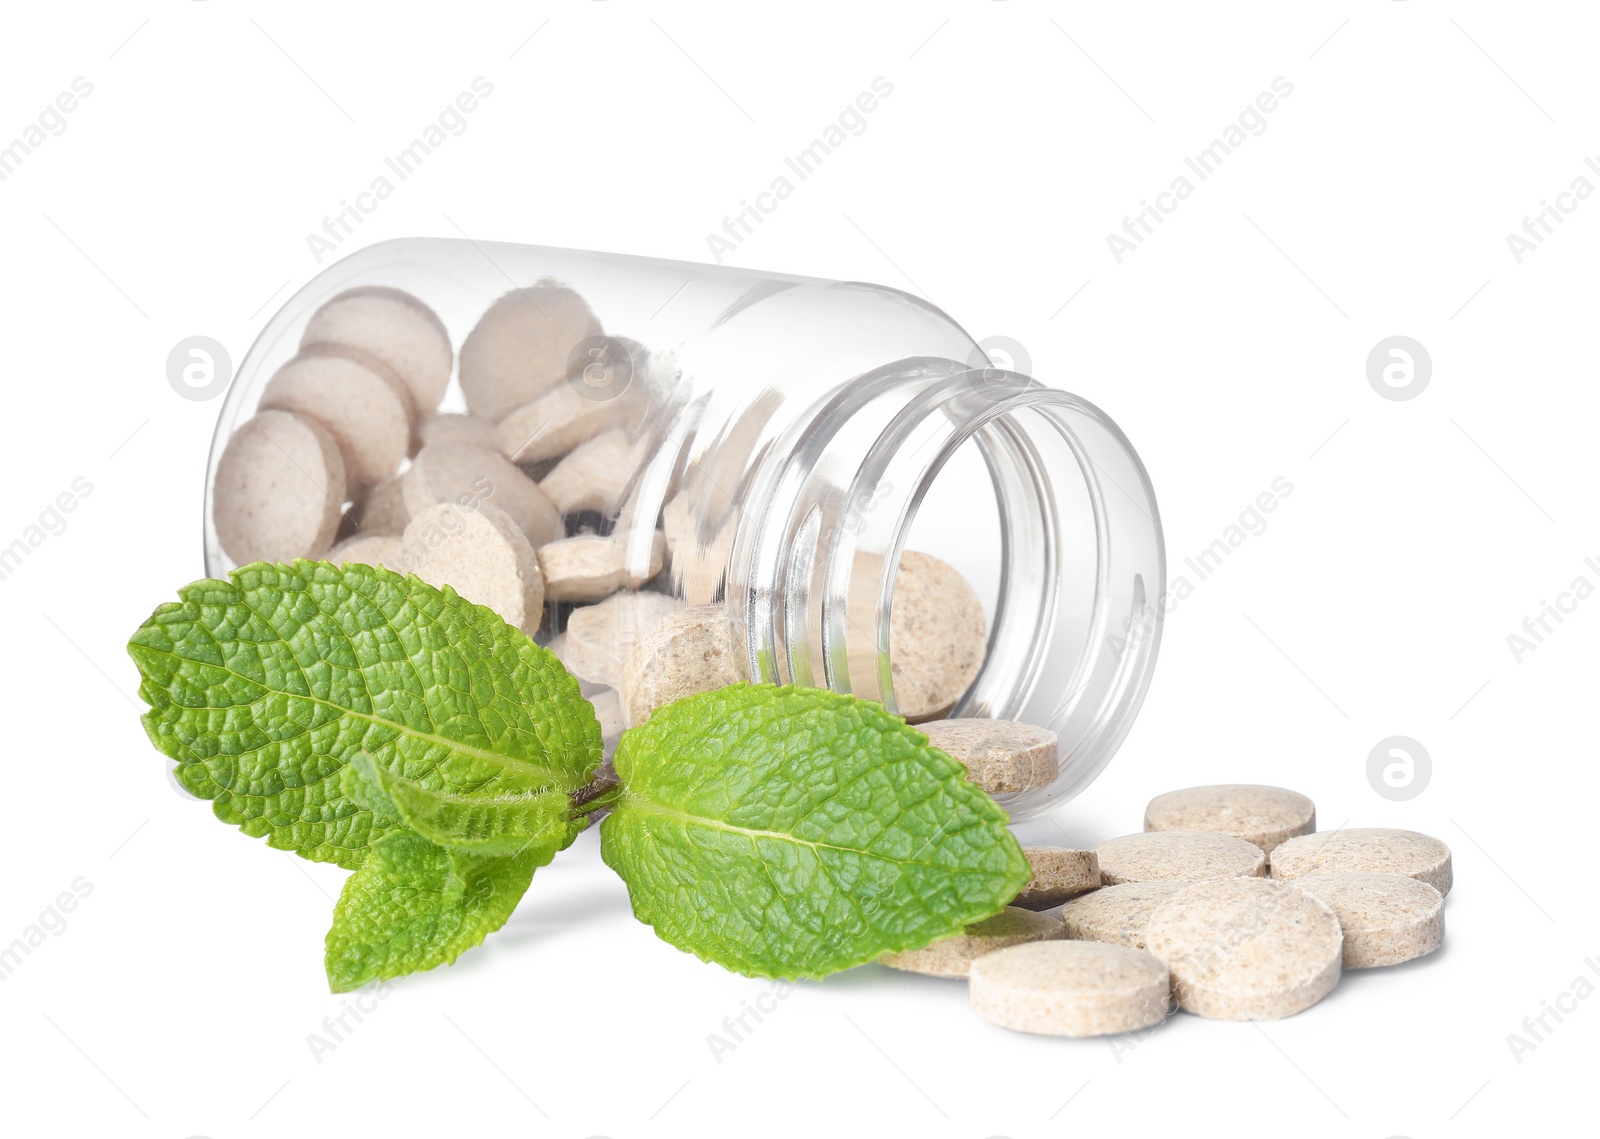 Photo of Bottle with vitamin pills and mint on white background